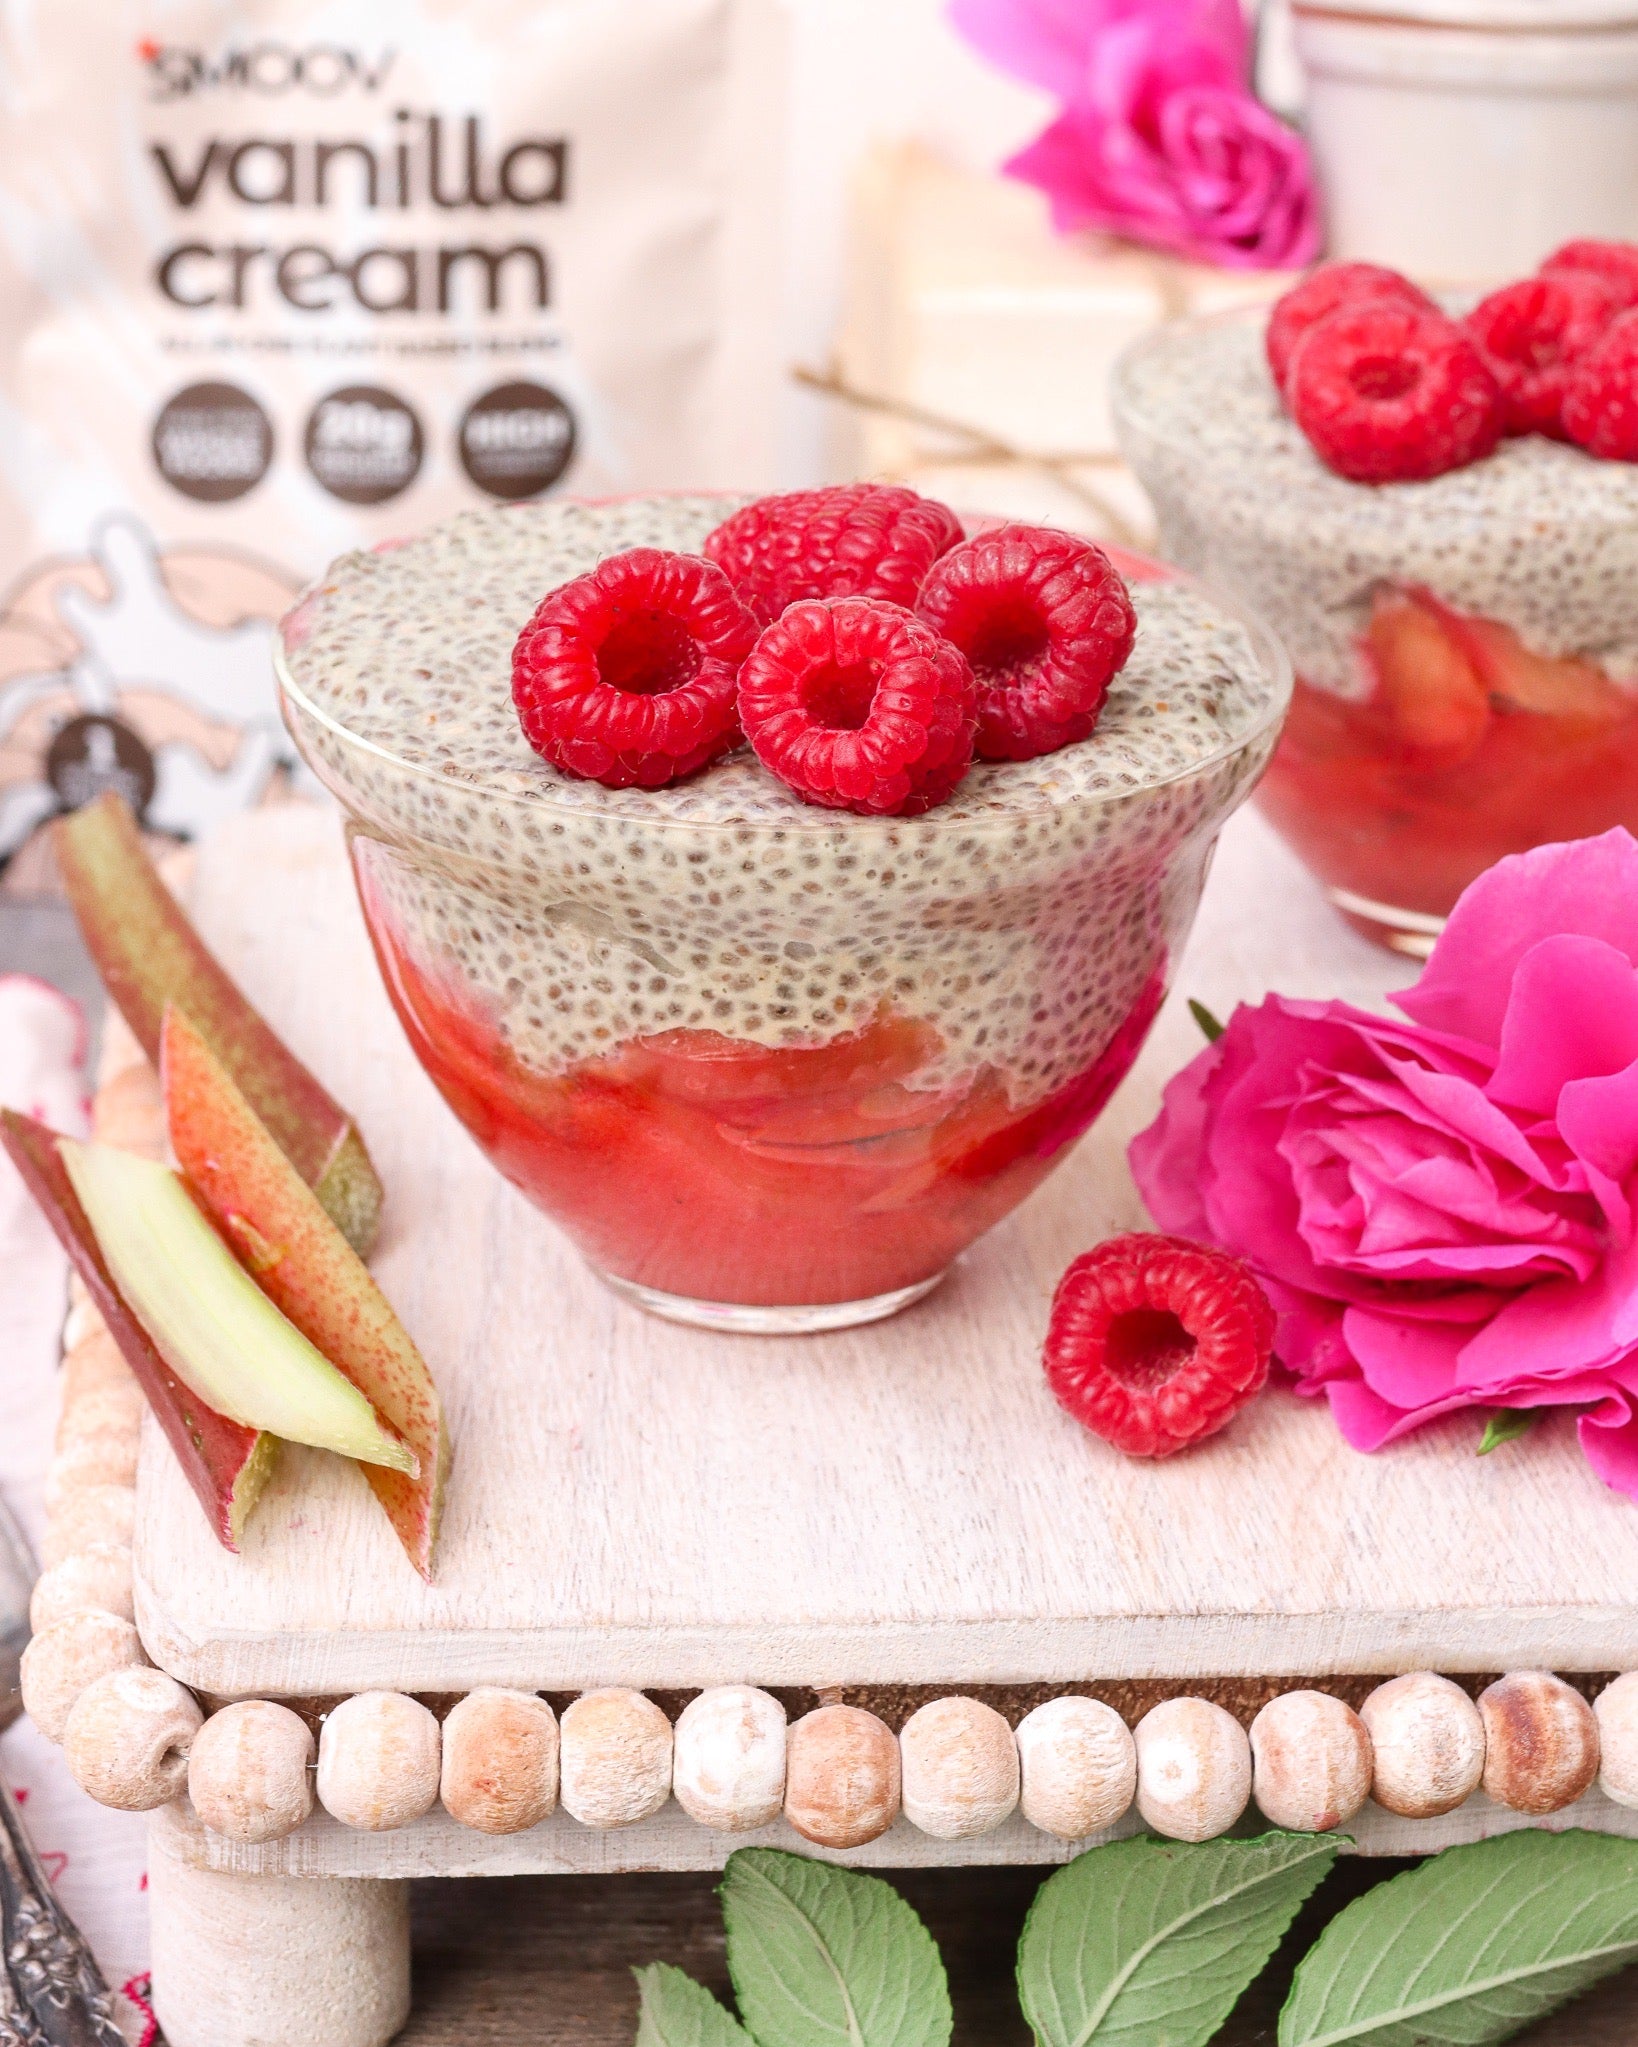 Vanilla Rhubarb Pudding made using smoov all in one vanilla protein and superfood blend